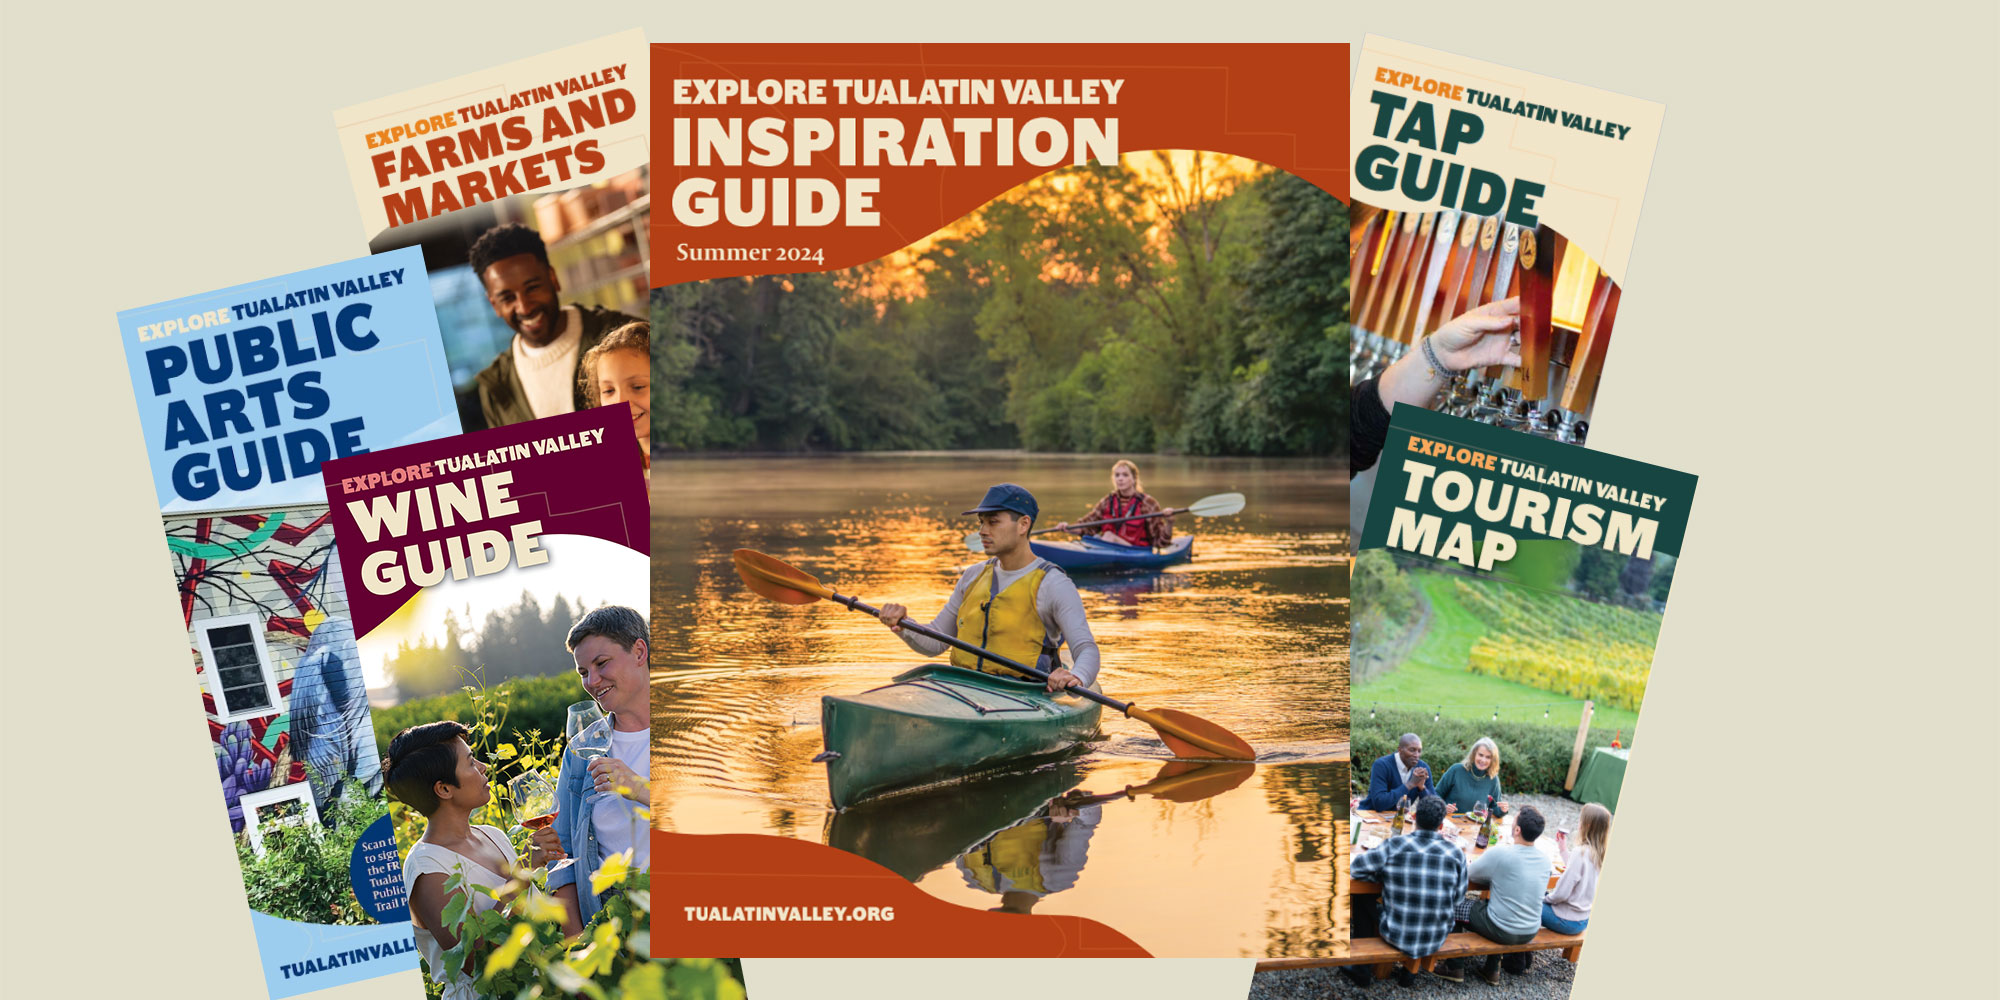 Farm and Markets Guide, Public Arts Guide, Wine Guide, Tap Guide, Tourism Map, Inspiration Guide